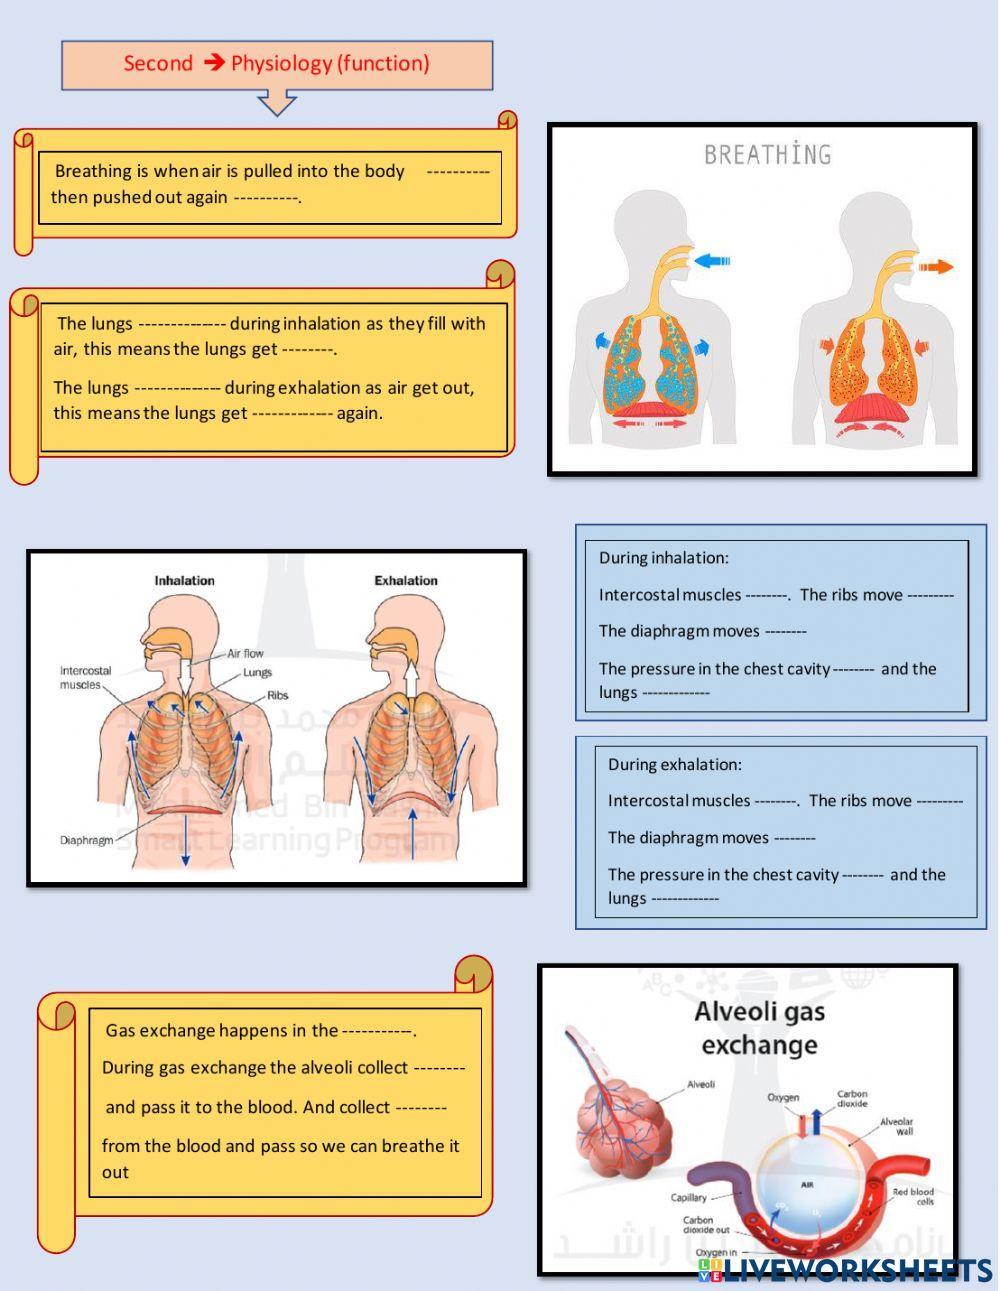 Anatomy and physiology of the respiratory system